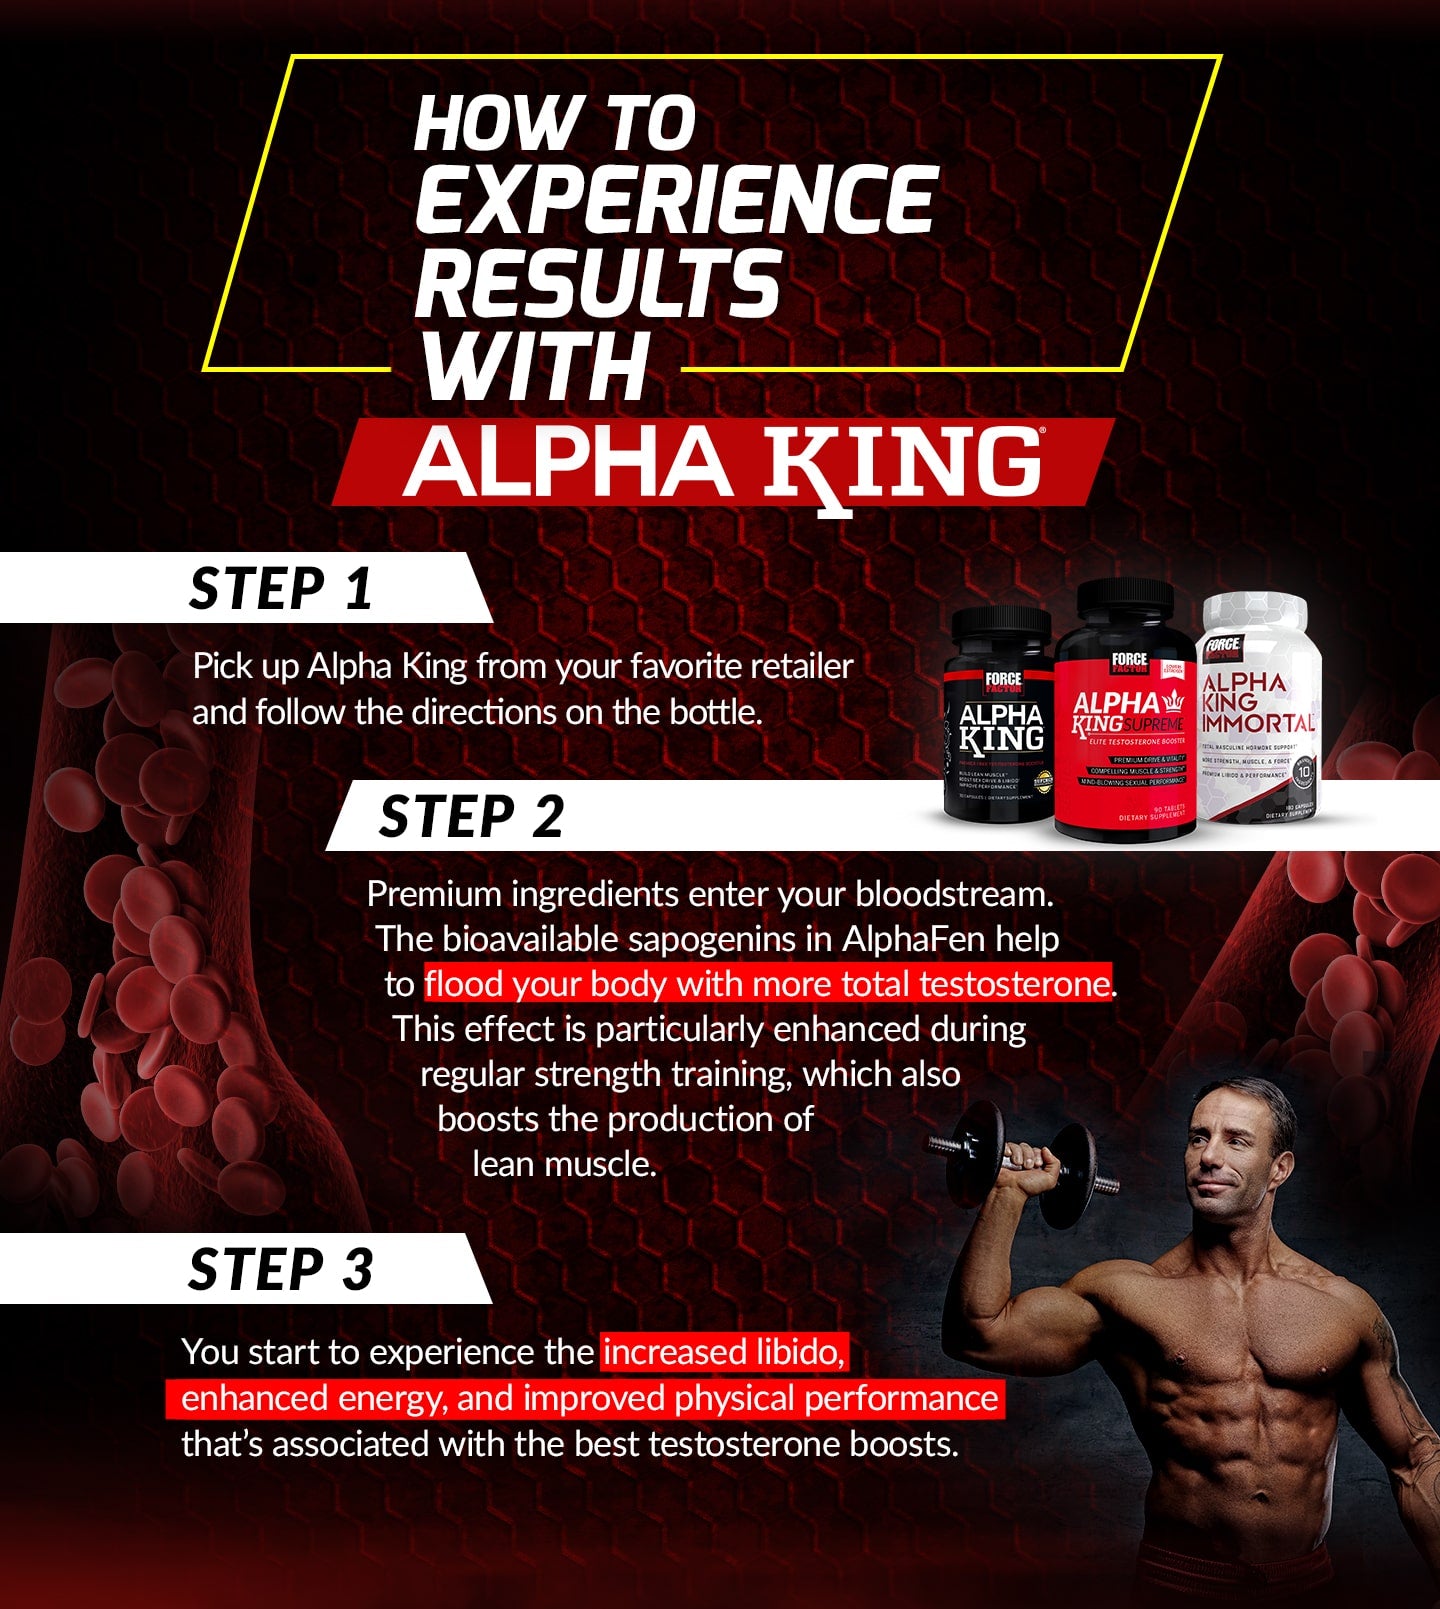 HOW TO EXPERIENCE RESULTS WITH ALPHA KING. STEP 1 - Pick up Alpha King from your favorite retailer and follow the directions on the bottle. STEP 2 - Premium ingredients enter your bloodstream. The bioavailable sapogenins in AlphaFen help to flood your body with more total testosterone. This effect is particularly enhanced during regular strength training, which also boosts the production of lean muscle. STEP 3 - You start to experience the increased libido, enhanced energy, and improved physical performance that’s associated with the best testosterone boosts.